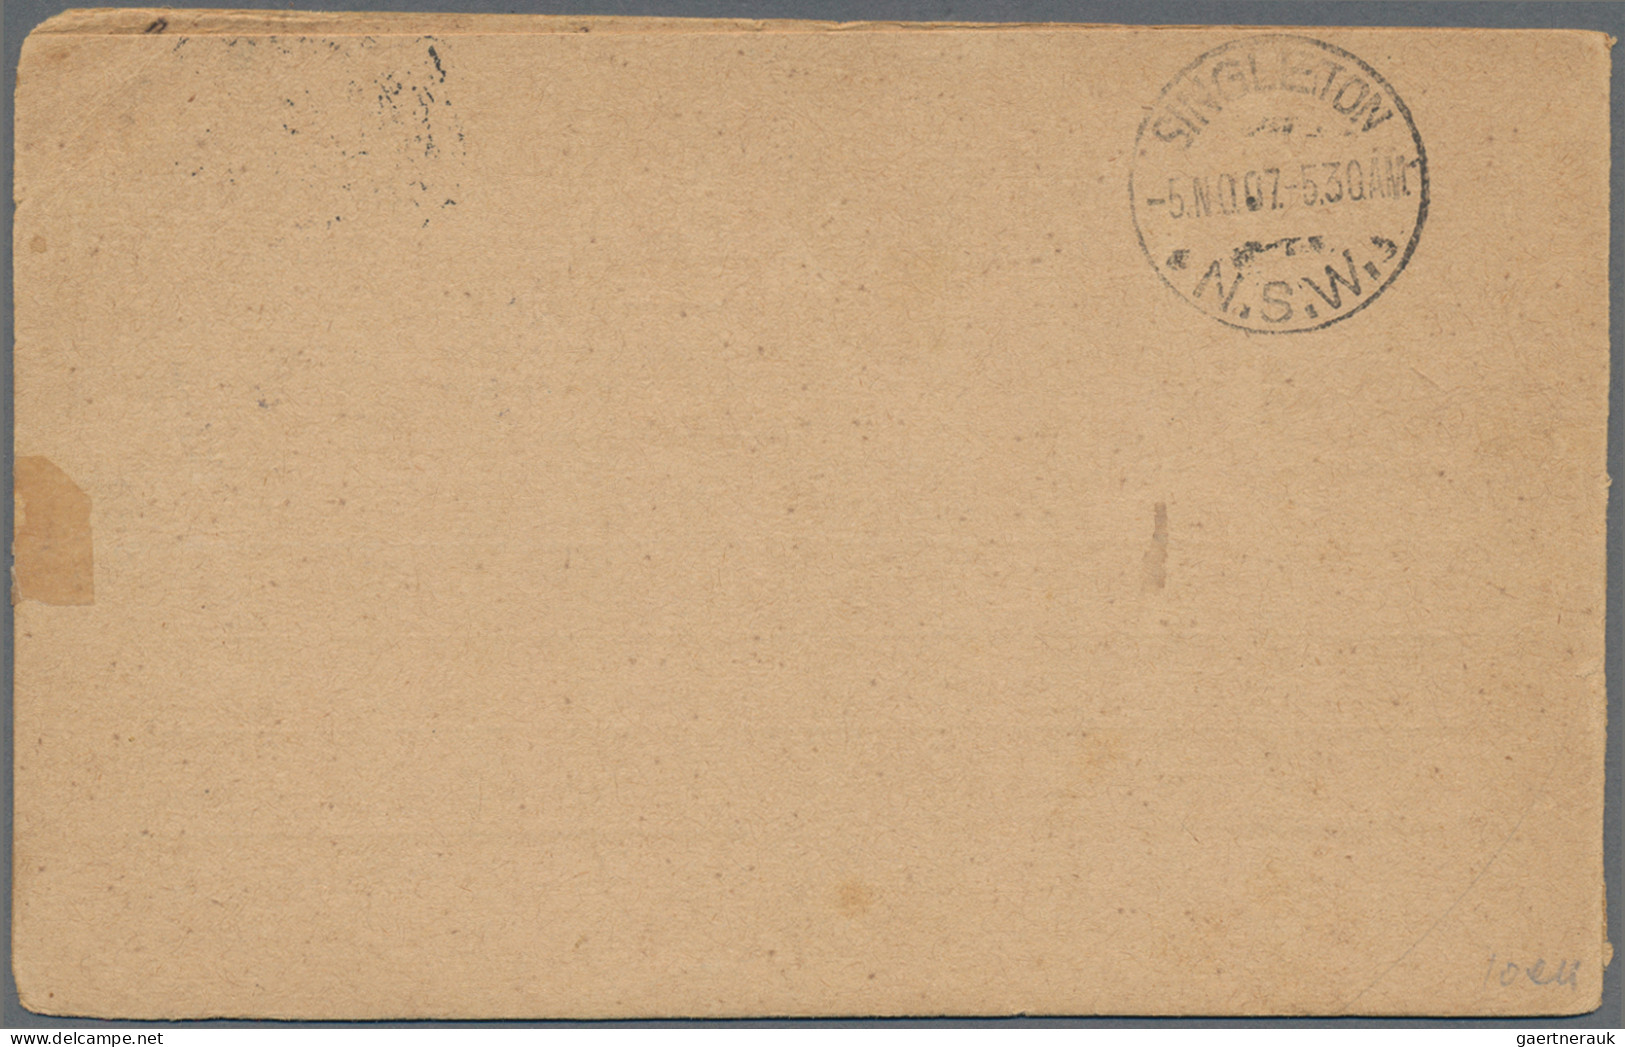 Portugal - Postal Stationery: 1896 P/s Double Card 20r.+20r. Grey-lilac Used Fro - Postal Stationery